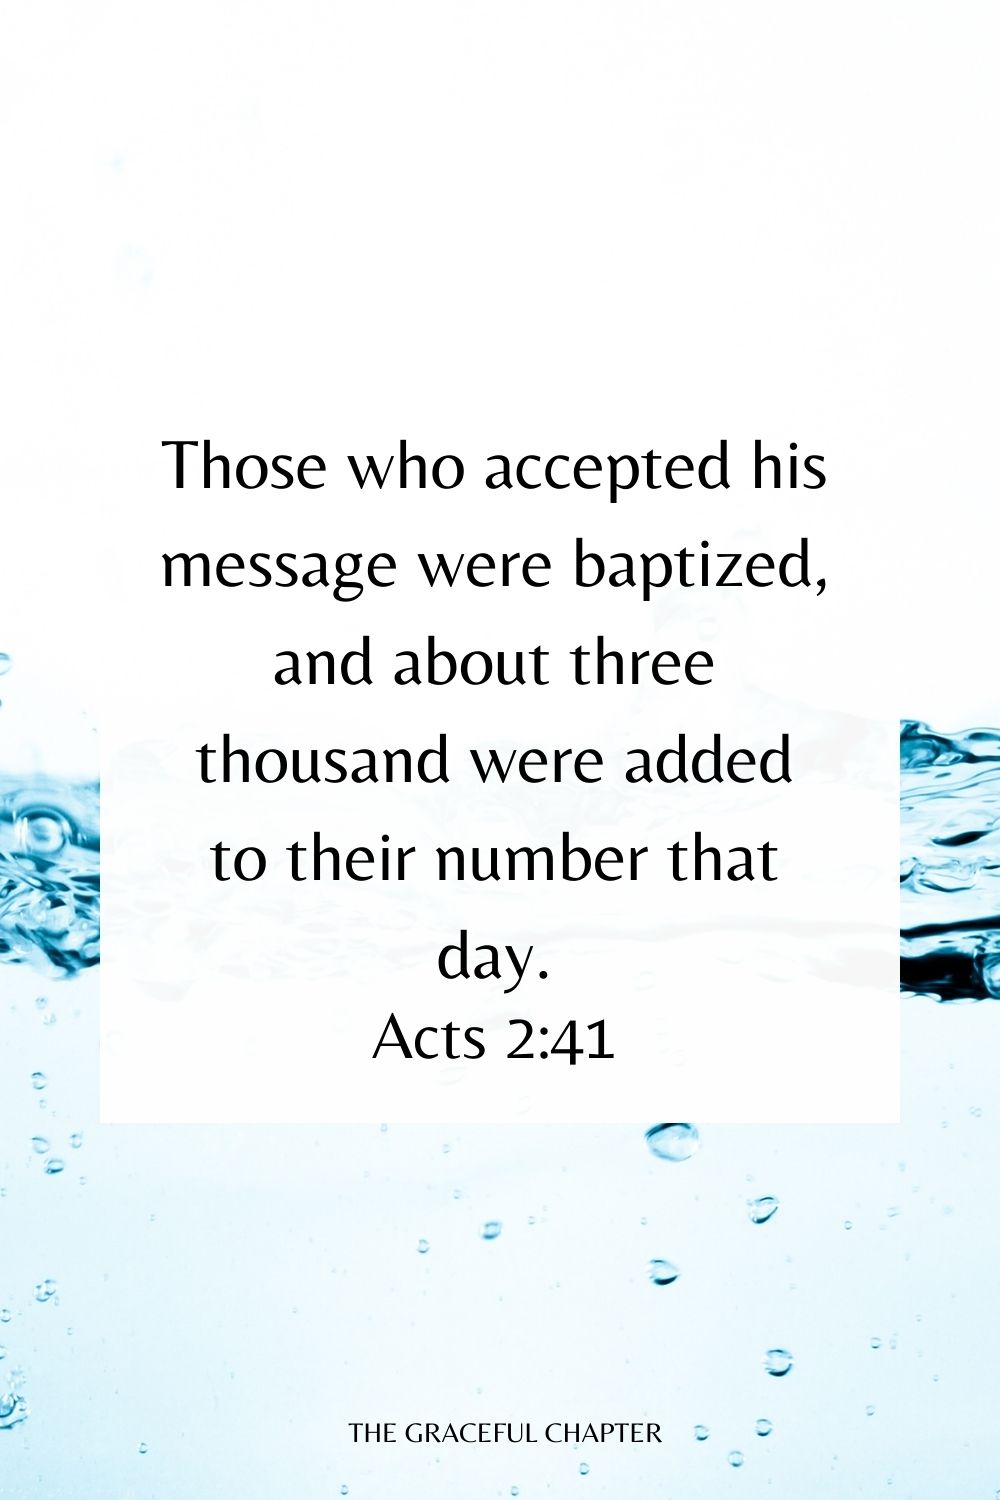 Those who accepted his message were baptized, and about three thousand were added to their number that day. Acts 2:41